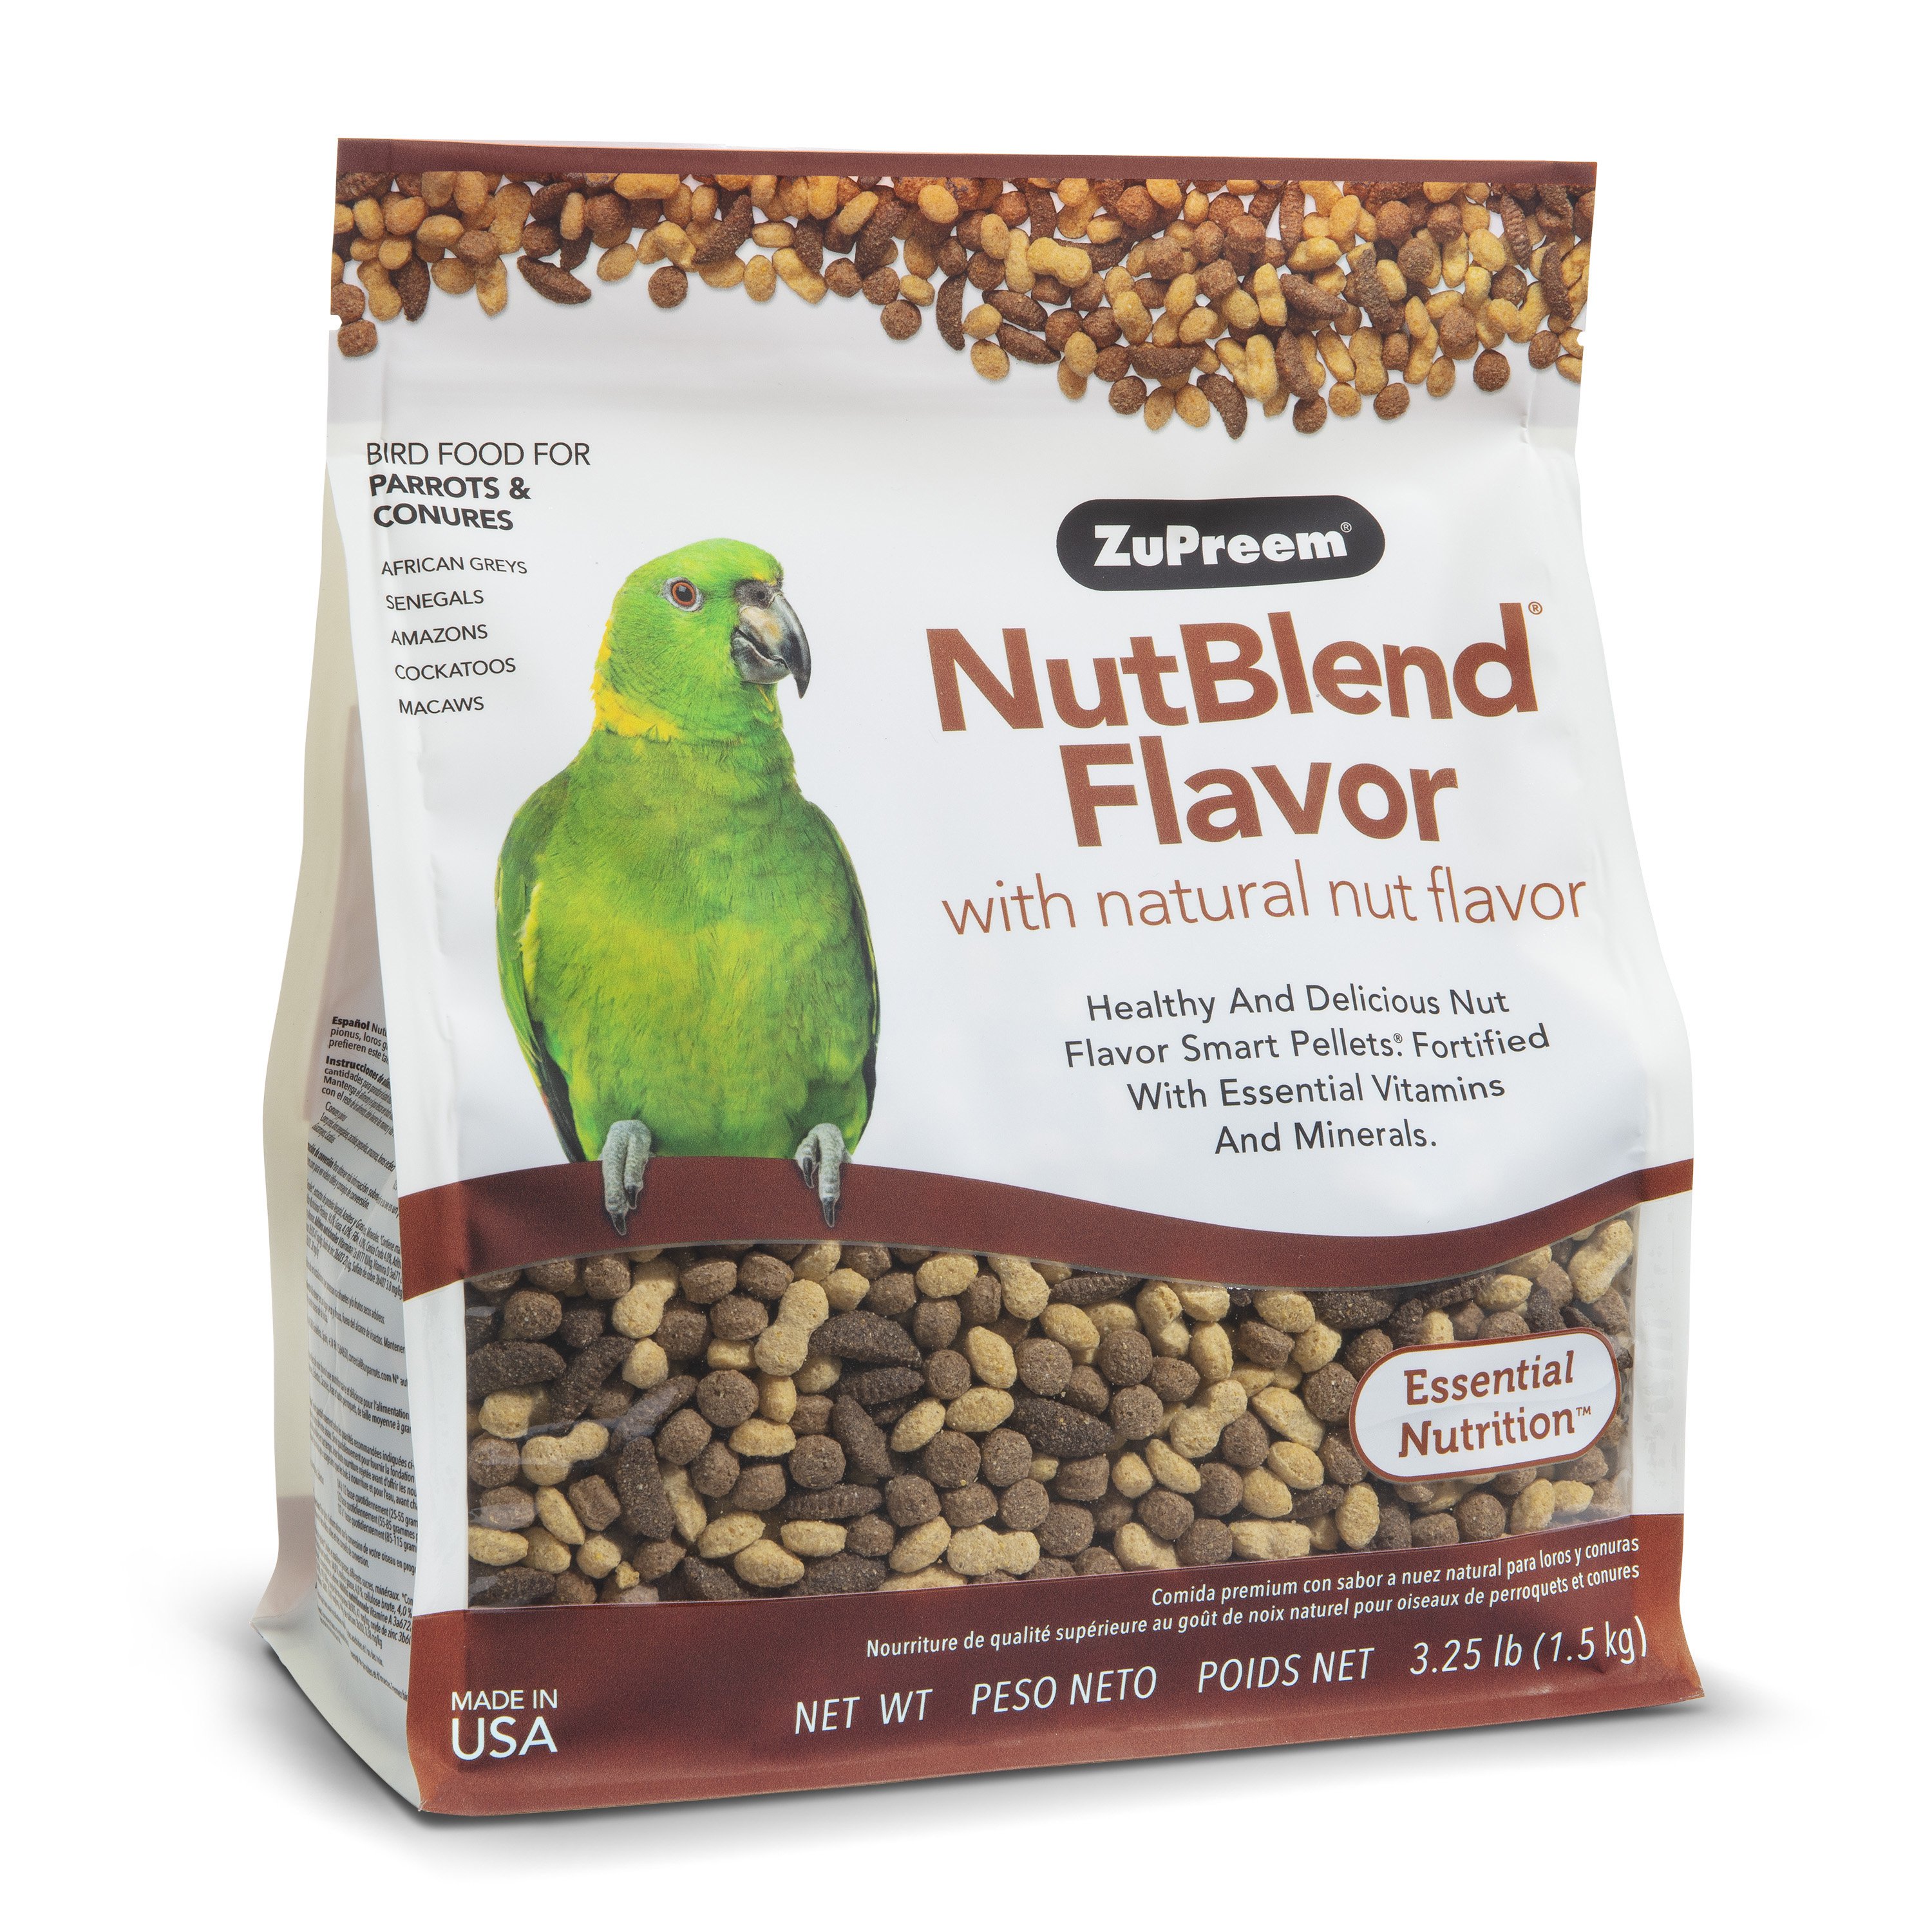 ZuPreem NutBlend Flavor for Parrots & Conures, 3.25 lbs